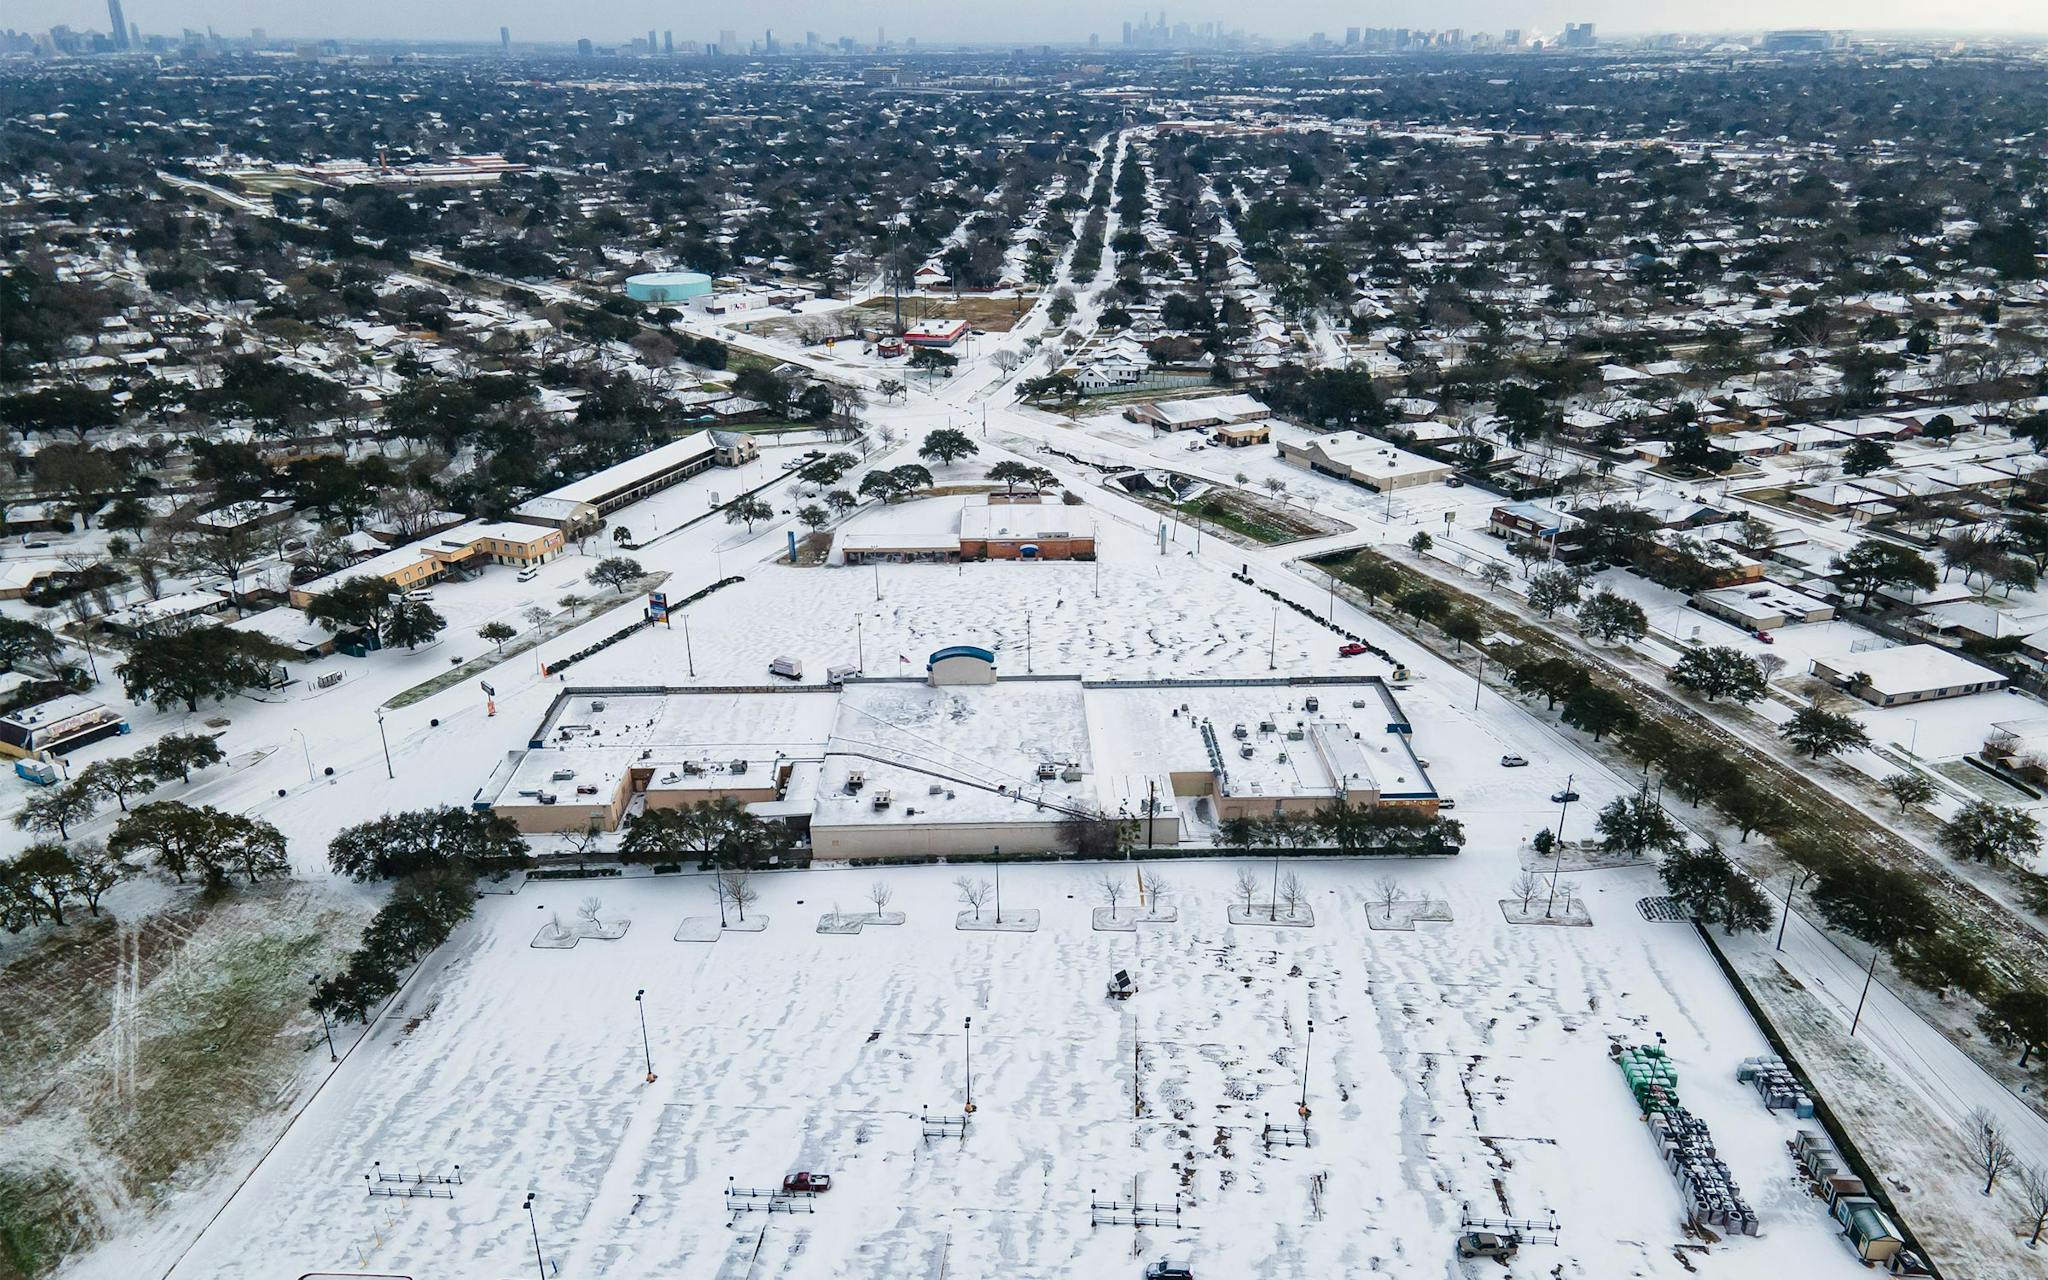 Snow covering Houston during the 2021 Texas snow storm.